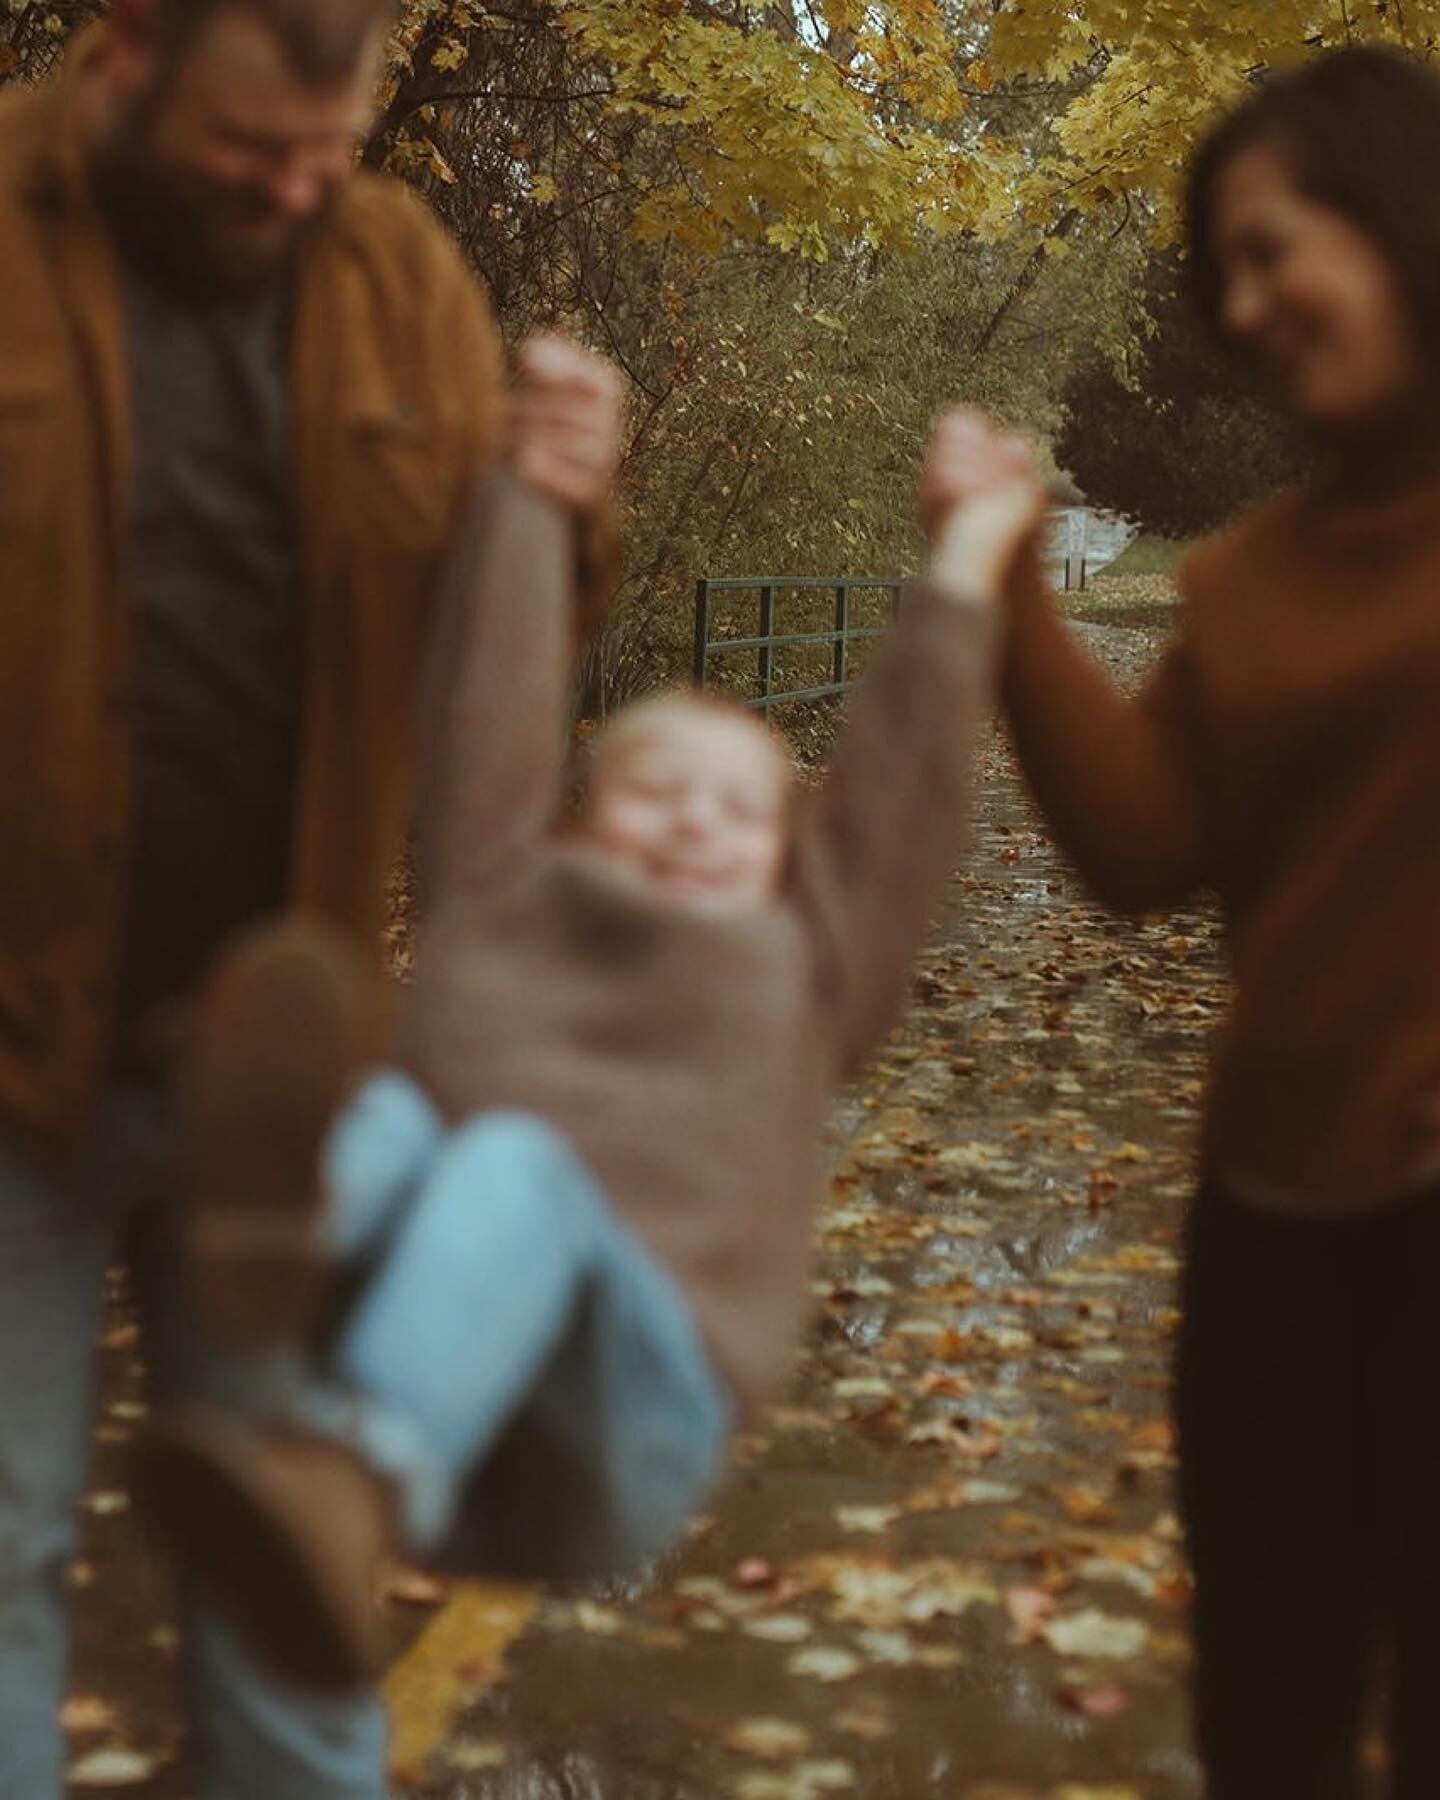 Sometimes it rains during your whole family session, and this is what happens when you just roll with it!

✌🏼☔️🍂👌🏼🍁🌉

#kamrafullerphotography #kamrafullerfamilyphotography #fallfamilyphotos #boisefamilyphotographer #boisefamilyphotography #idah